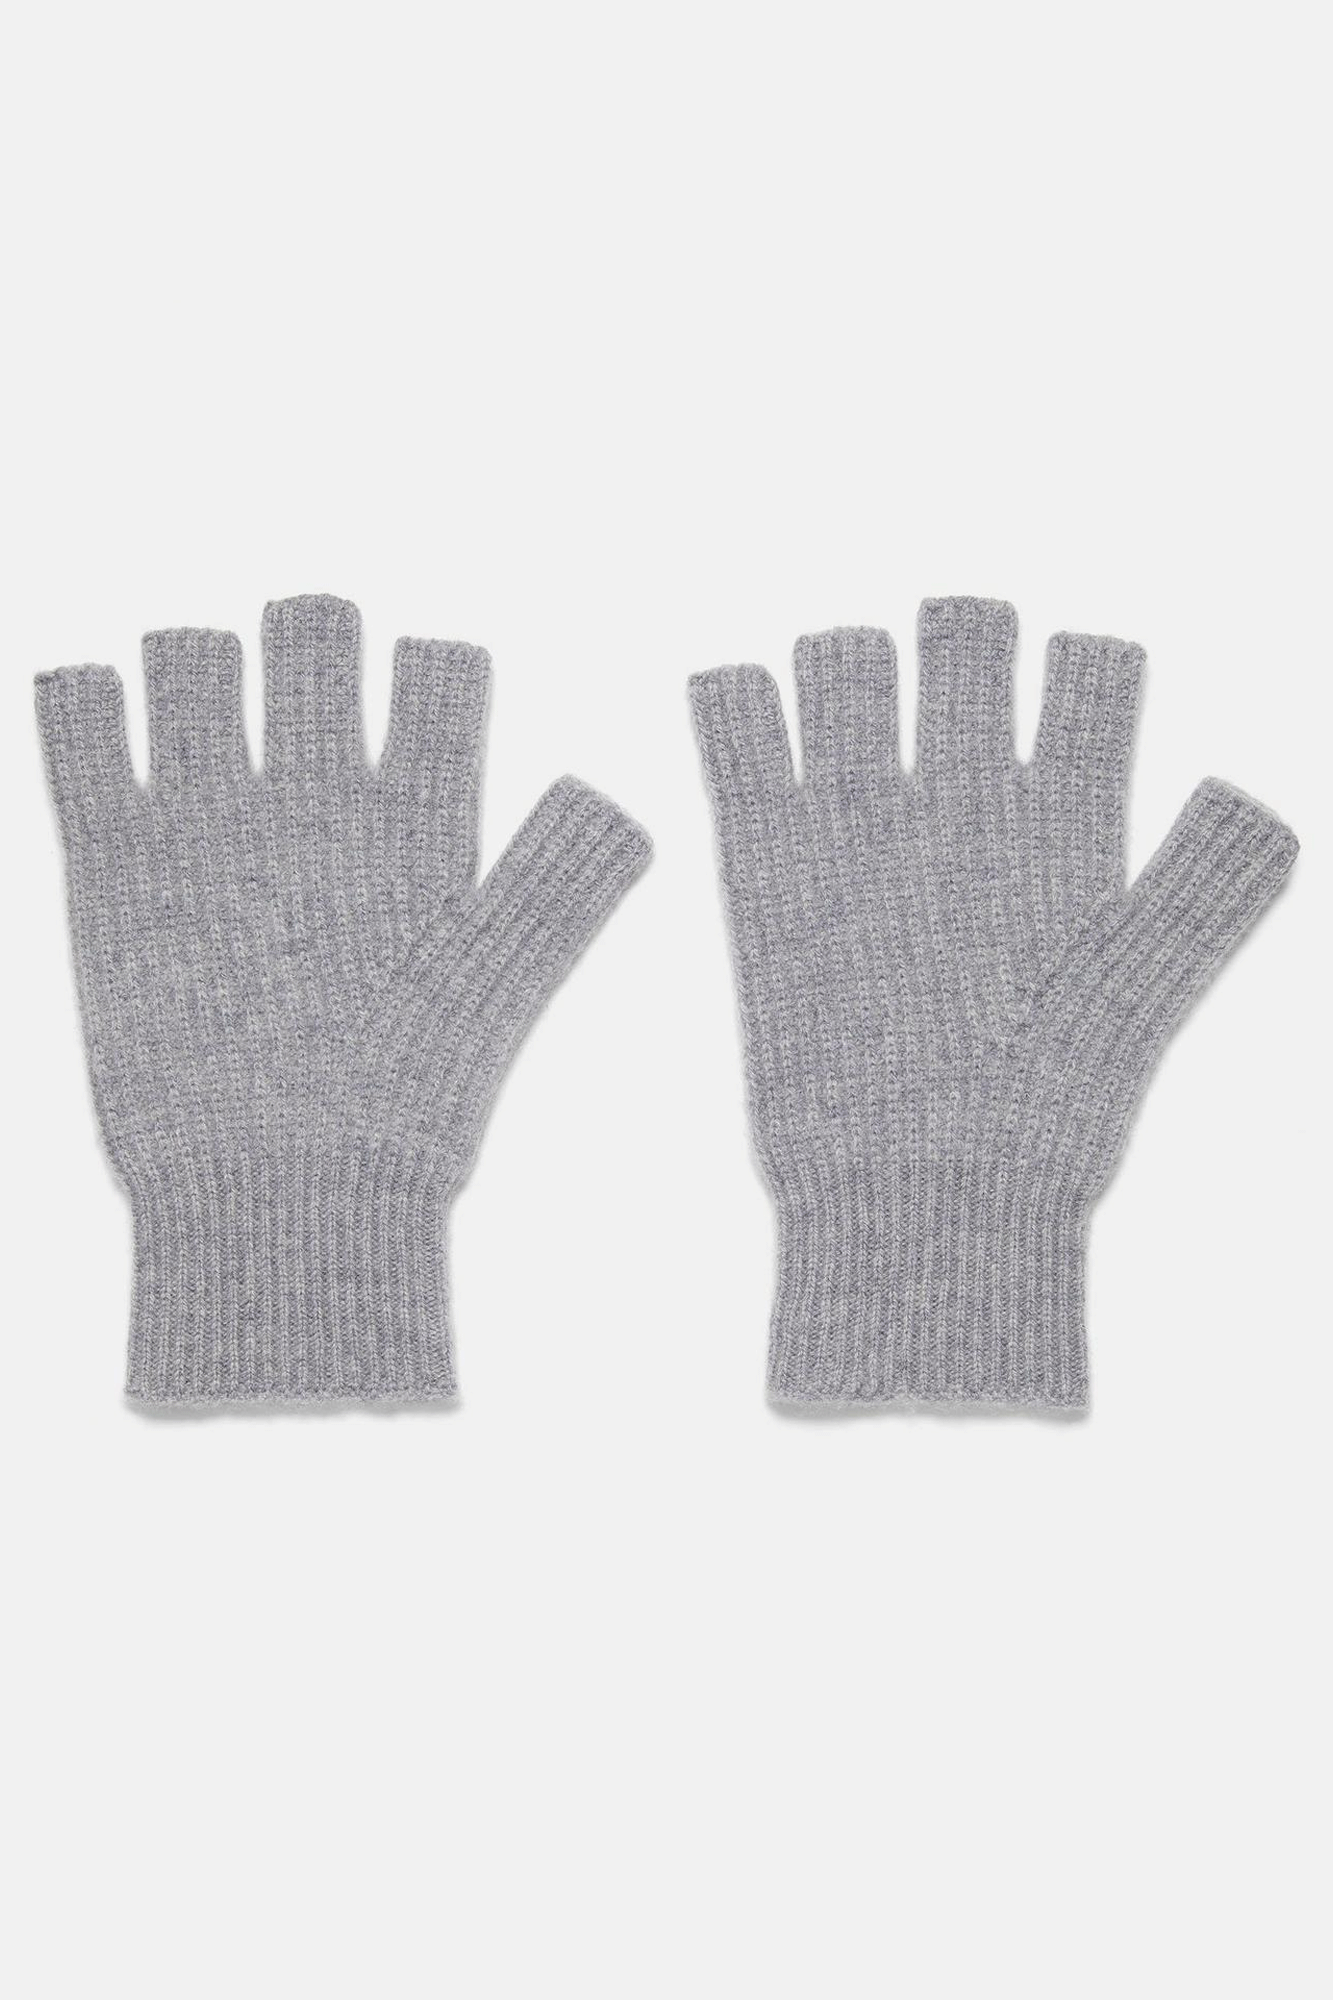 Cashmere Writing Gloves Product Review - NeededInTheHome